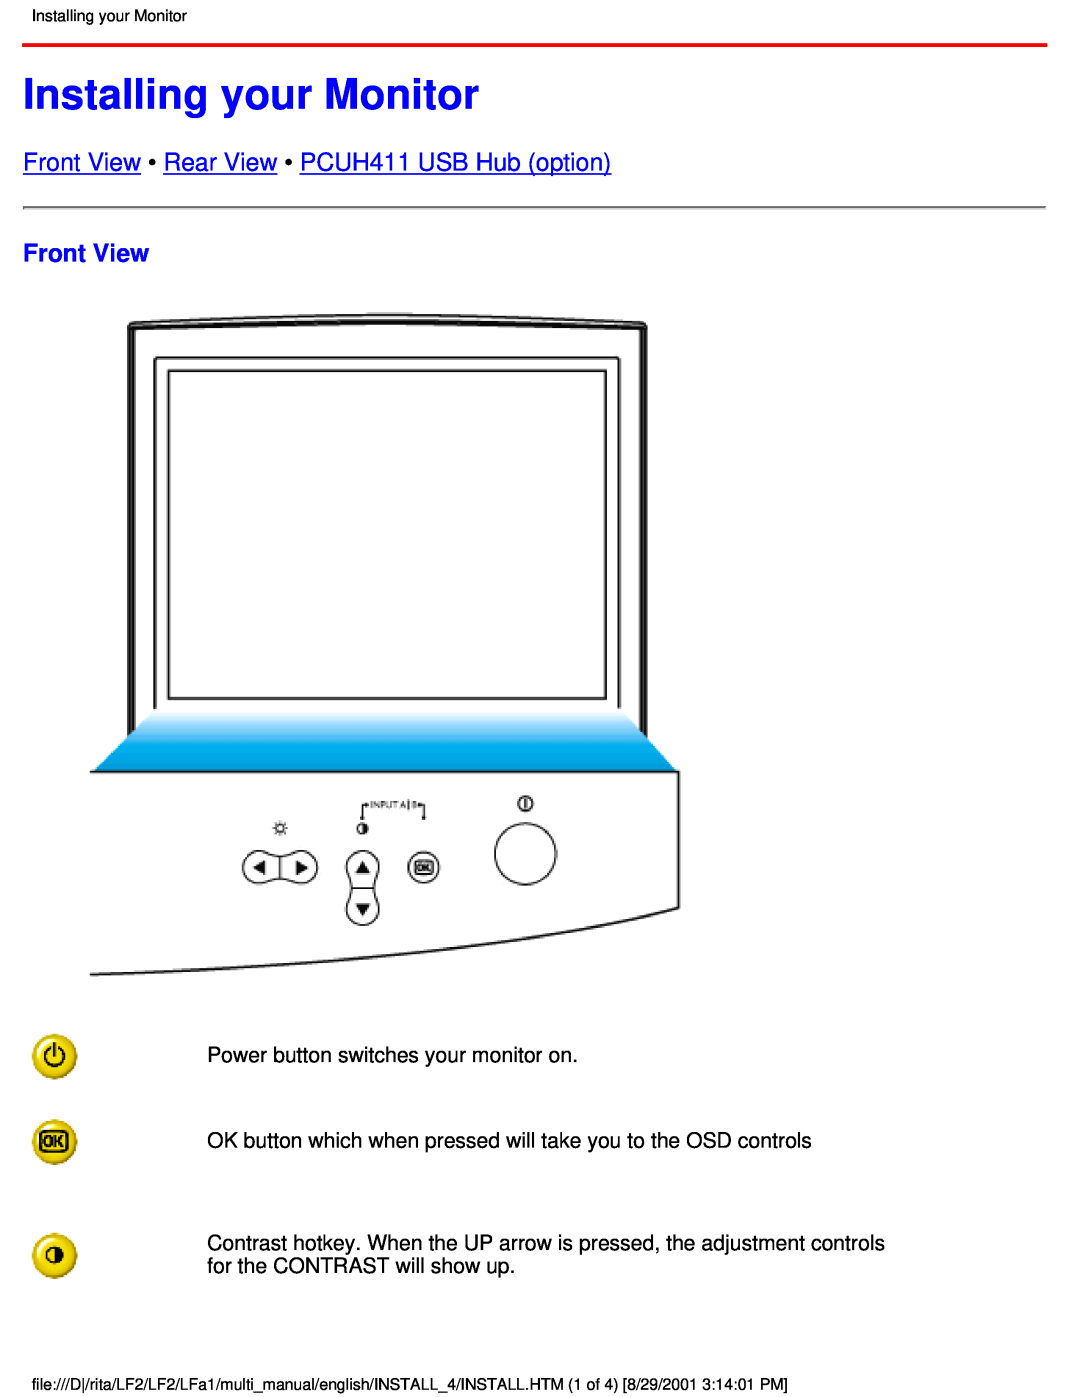 Philips 201P user manual Installing your Monitor, Front View Rear View PCUH411 USB Hub option 